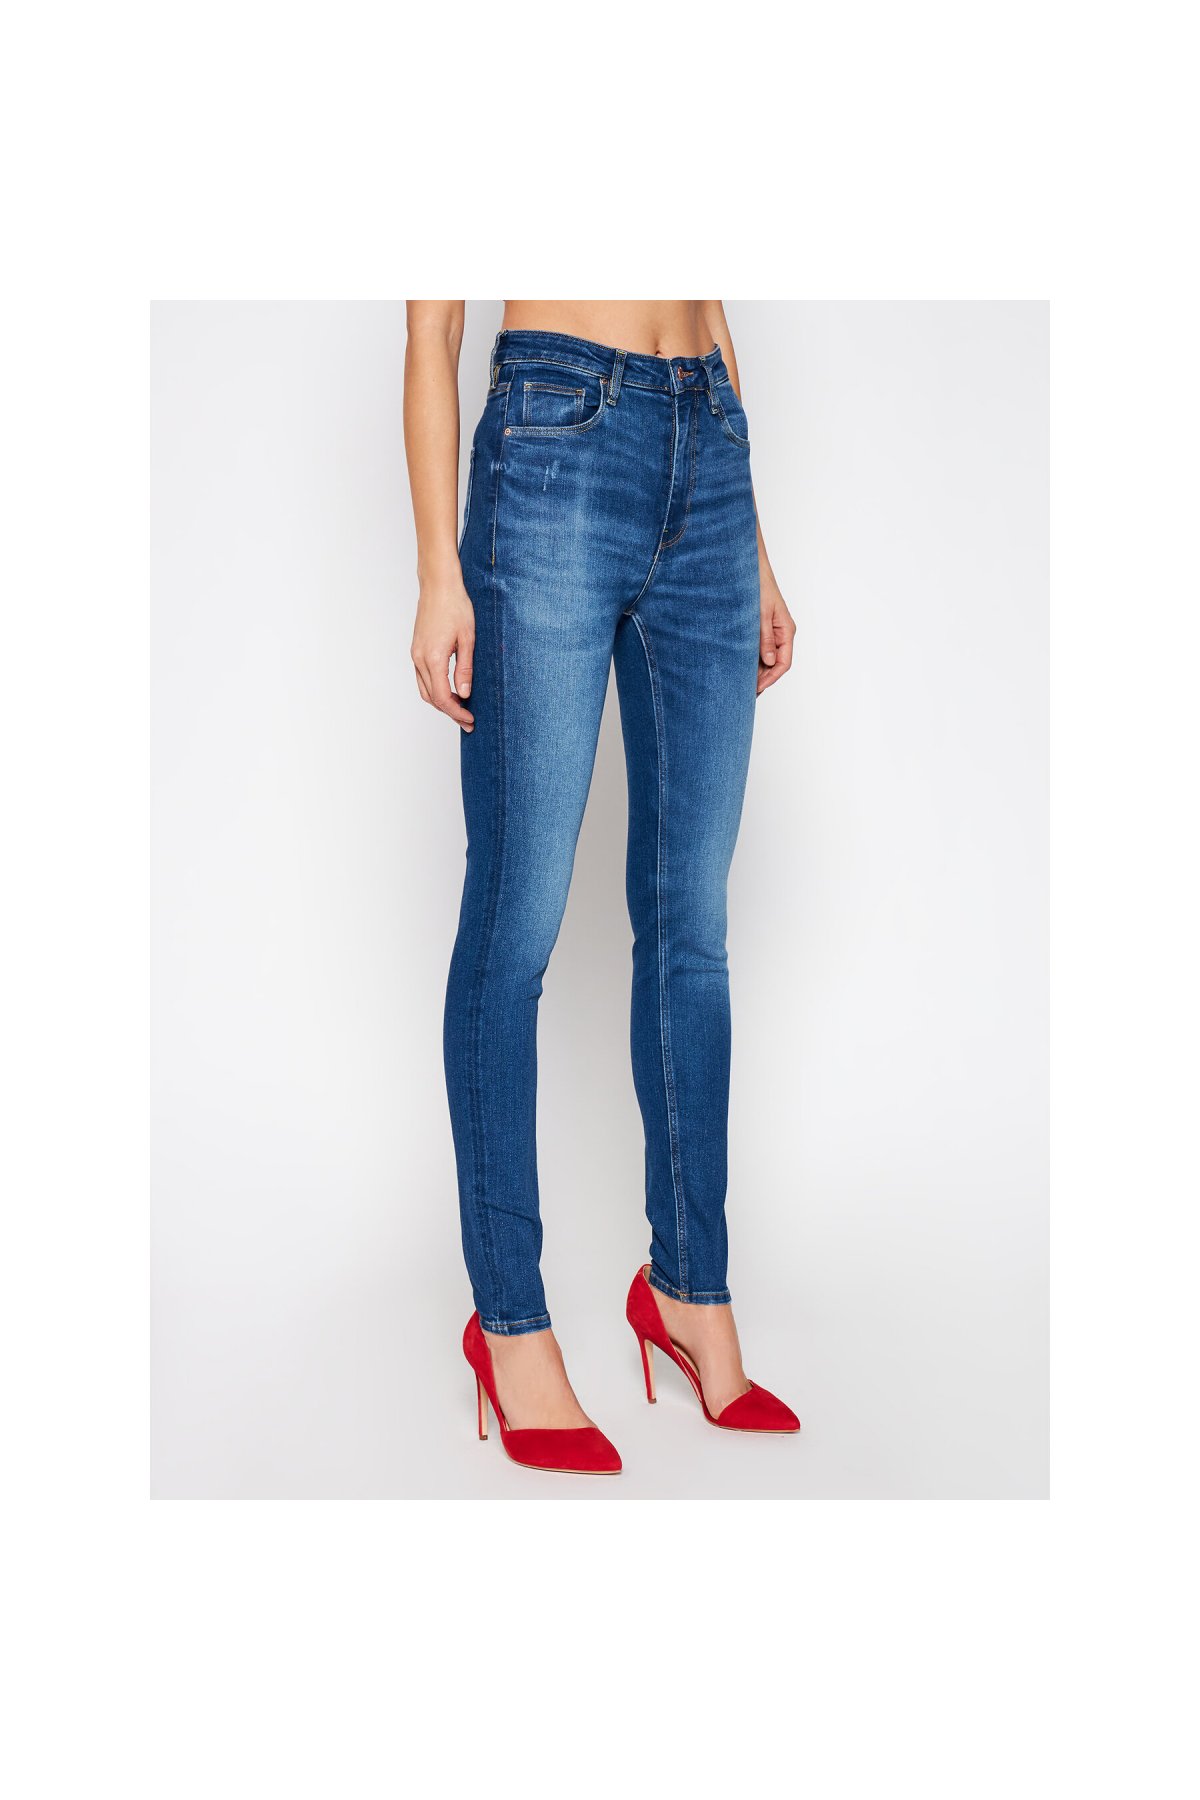 Guess jeans W1RA26 D4AO3